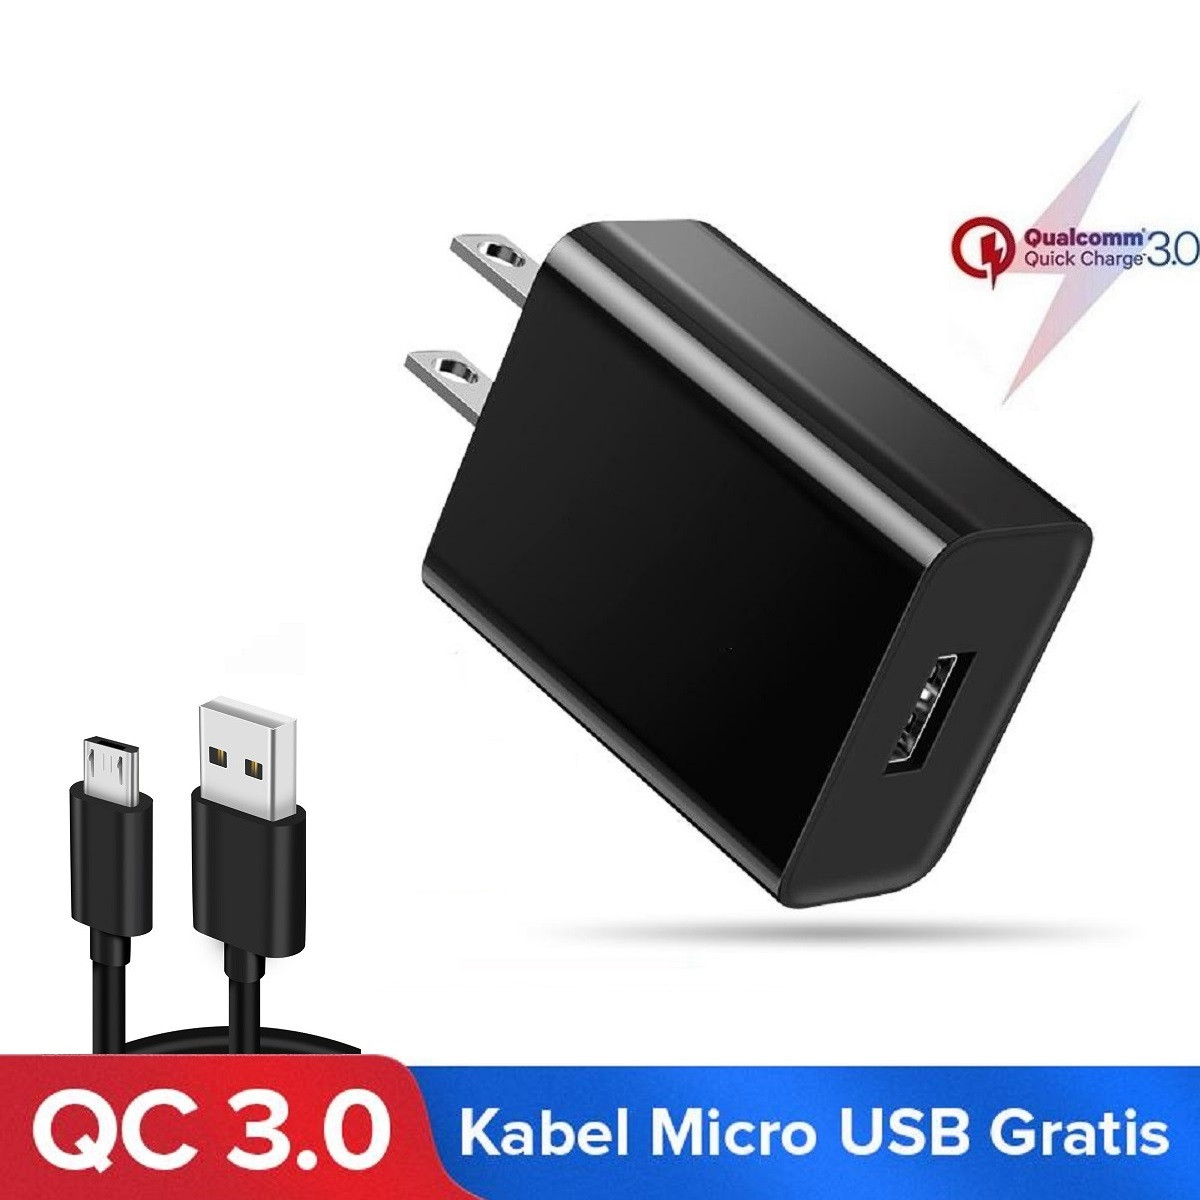 18w Qc3 0 Charger Quick Charge 3 0 Quick Charger For Oppo Vivo Xiaomi Redmi Note 5 Pro Xiaomi Redmi 6 Pro Huawei Y9 Samsung J7 Prime Realme Handphone 18w Fast Charger Black